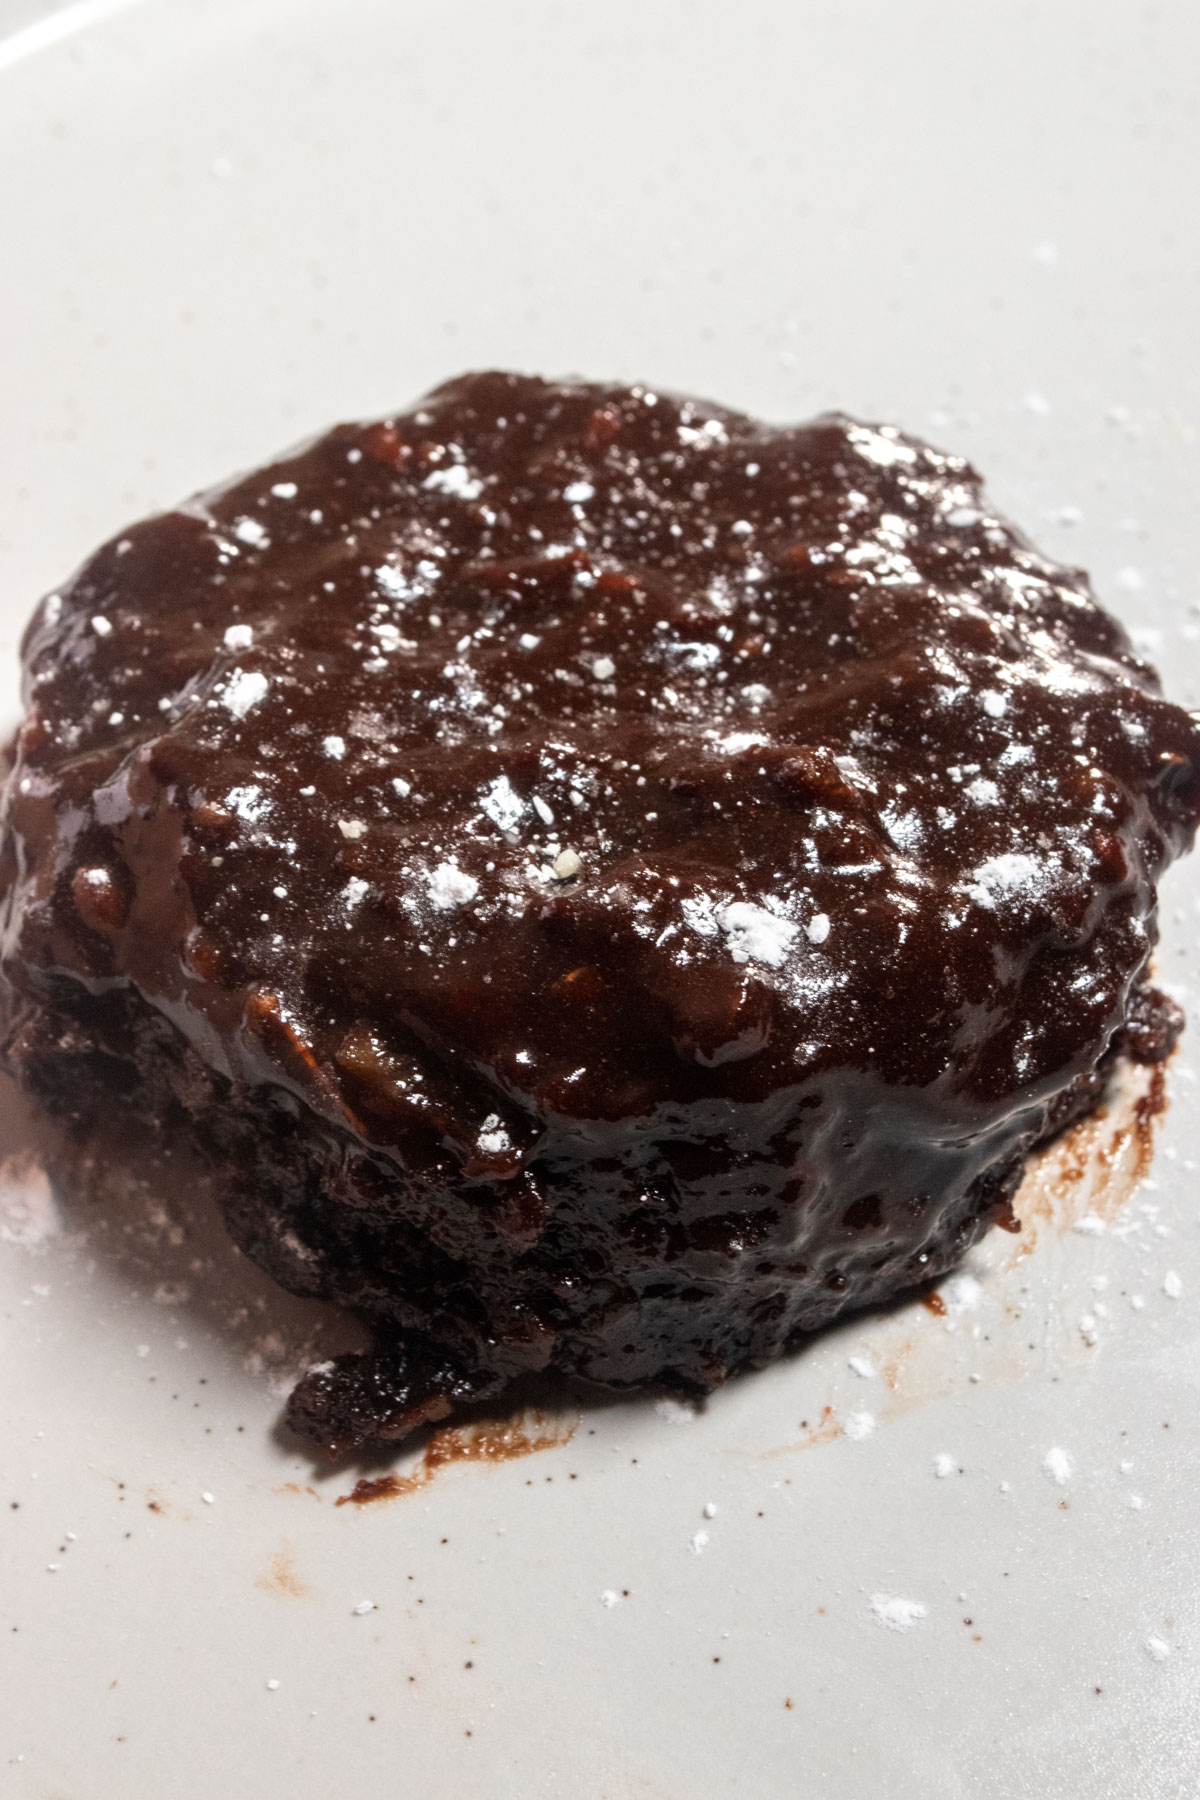 A large single chocolate mug cake on a white plate. The top of the cake is melted and runny. 